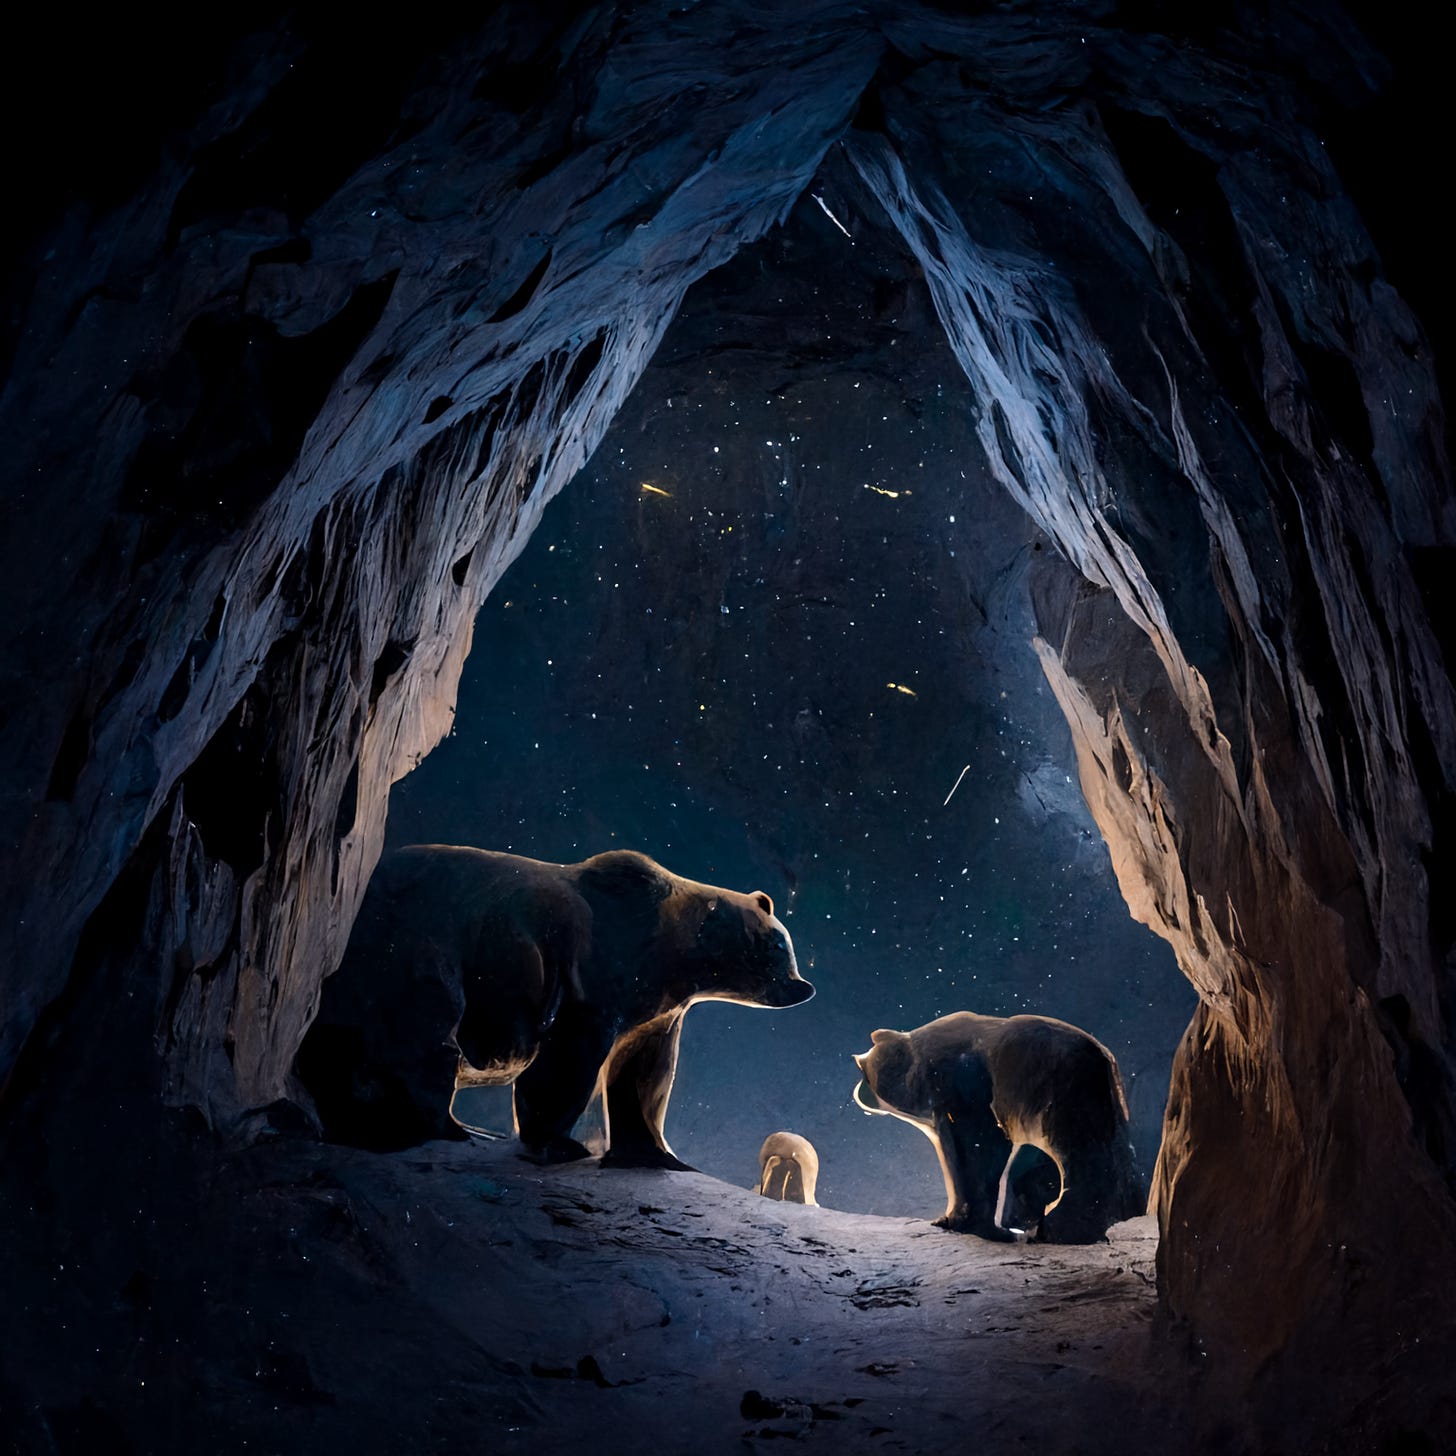 bears emerging from a cave into a starry night